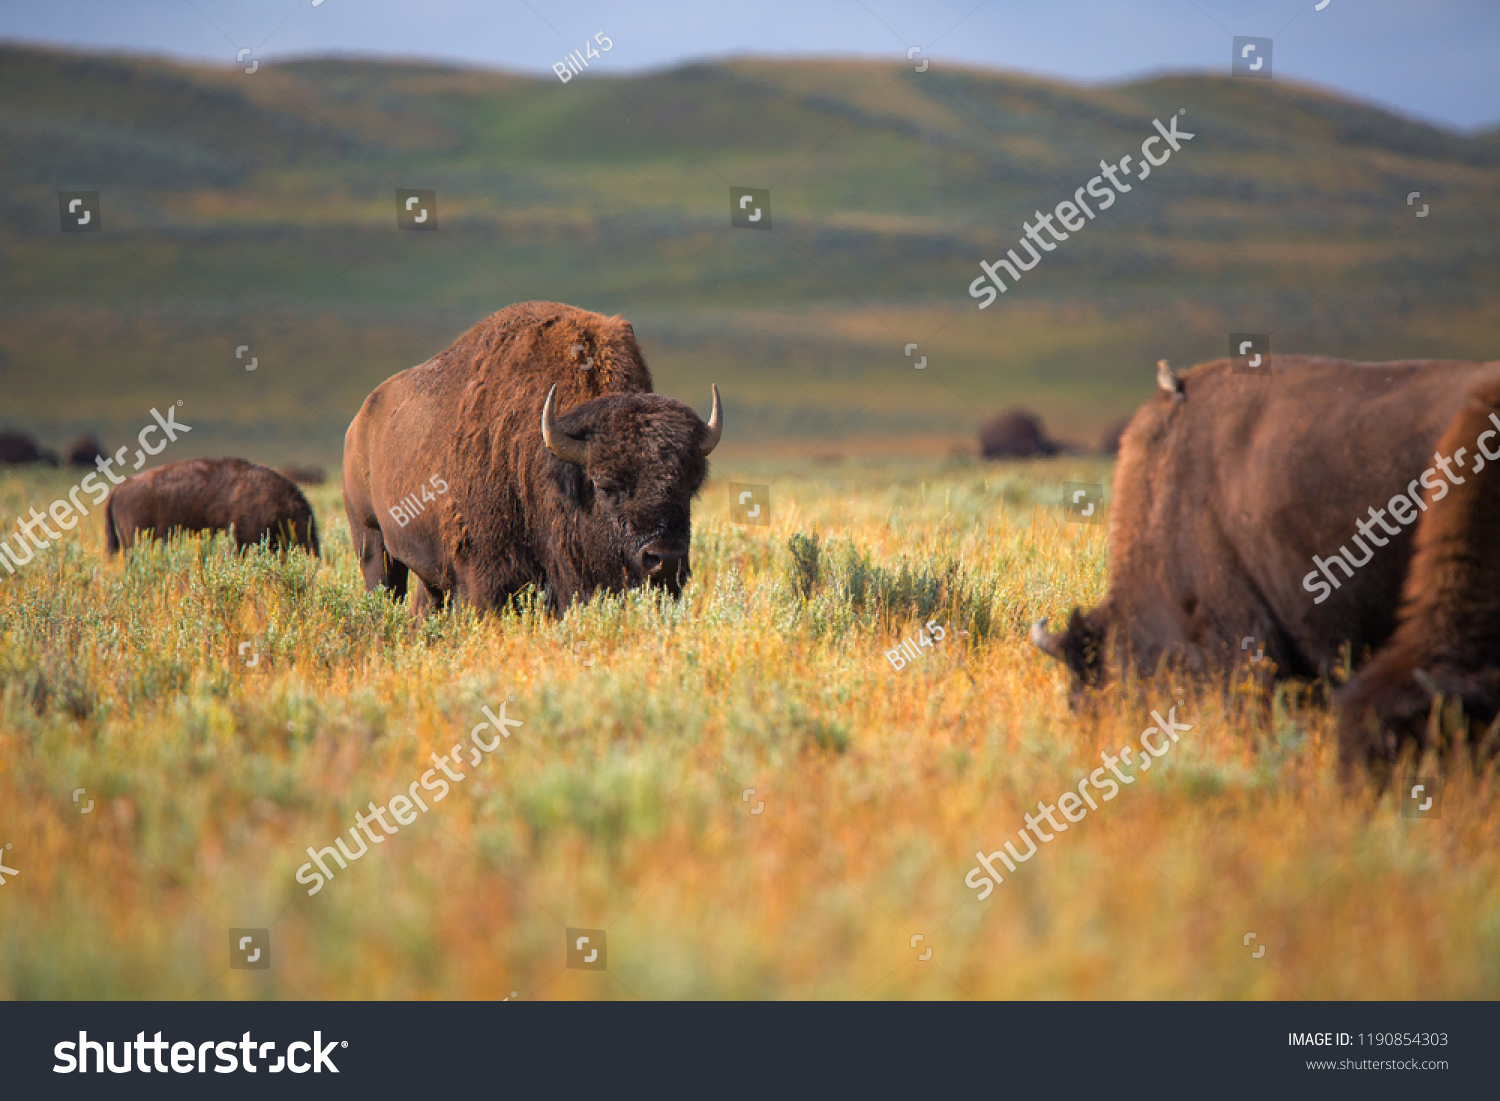 bison in grasslands of Yellowstone National Park in Wyoming in the United States of America #1190854303